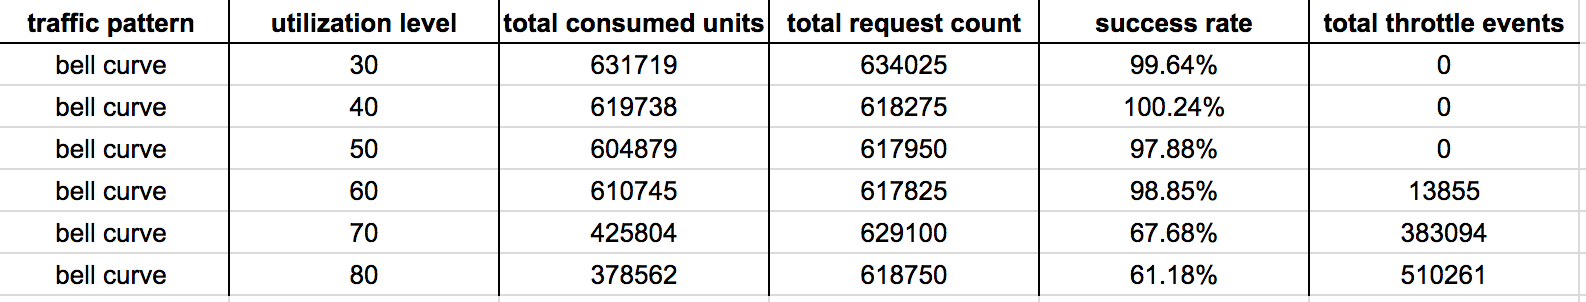 I’m not sure why the total consumed units and total request count metrics didn’t match exactly when the utilization is between 30% and 50%, but seeing as there were no throttled events I’m going to put that difference down to inaccuracies in CloudWatch.